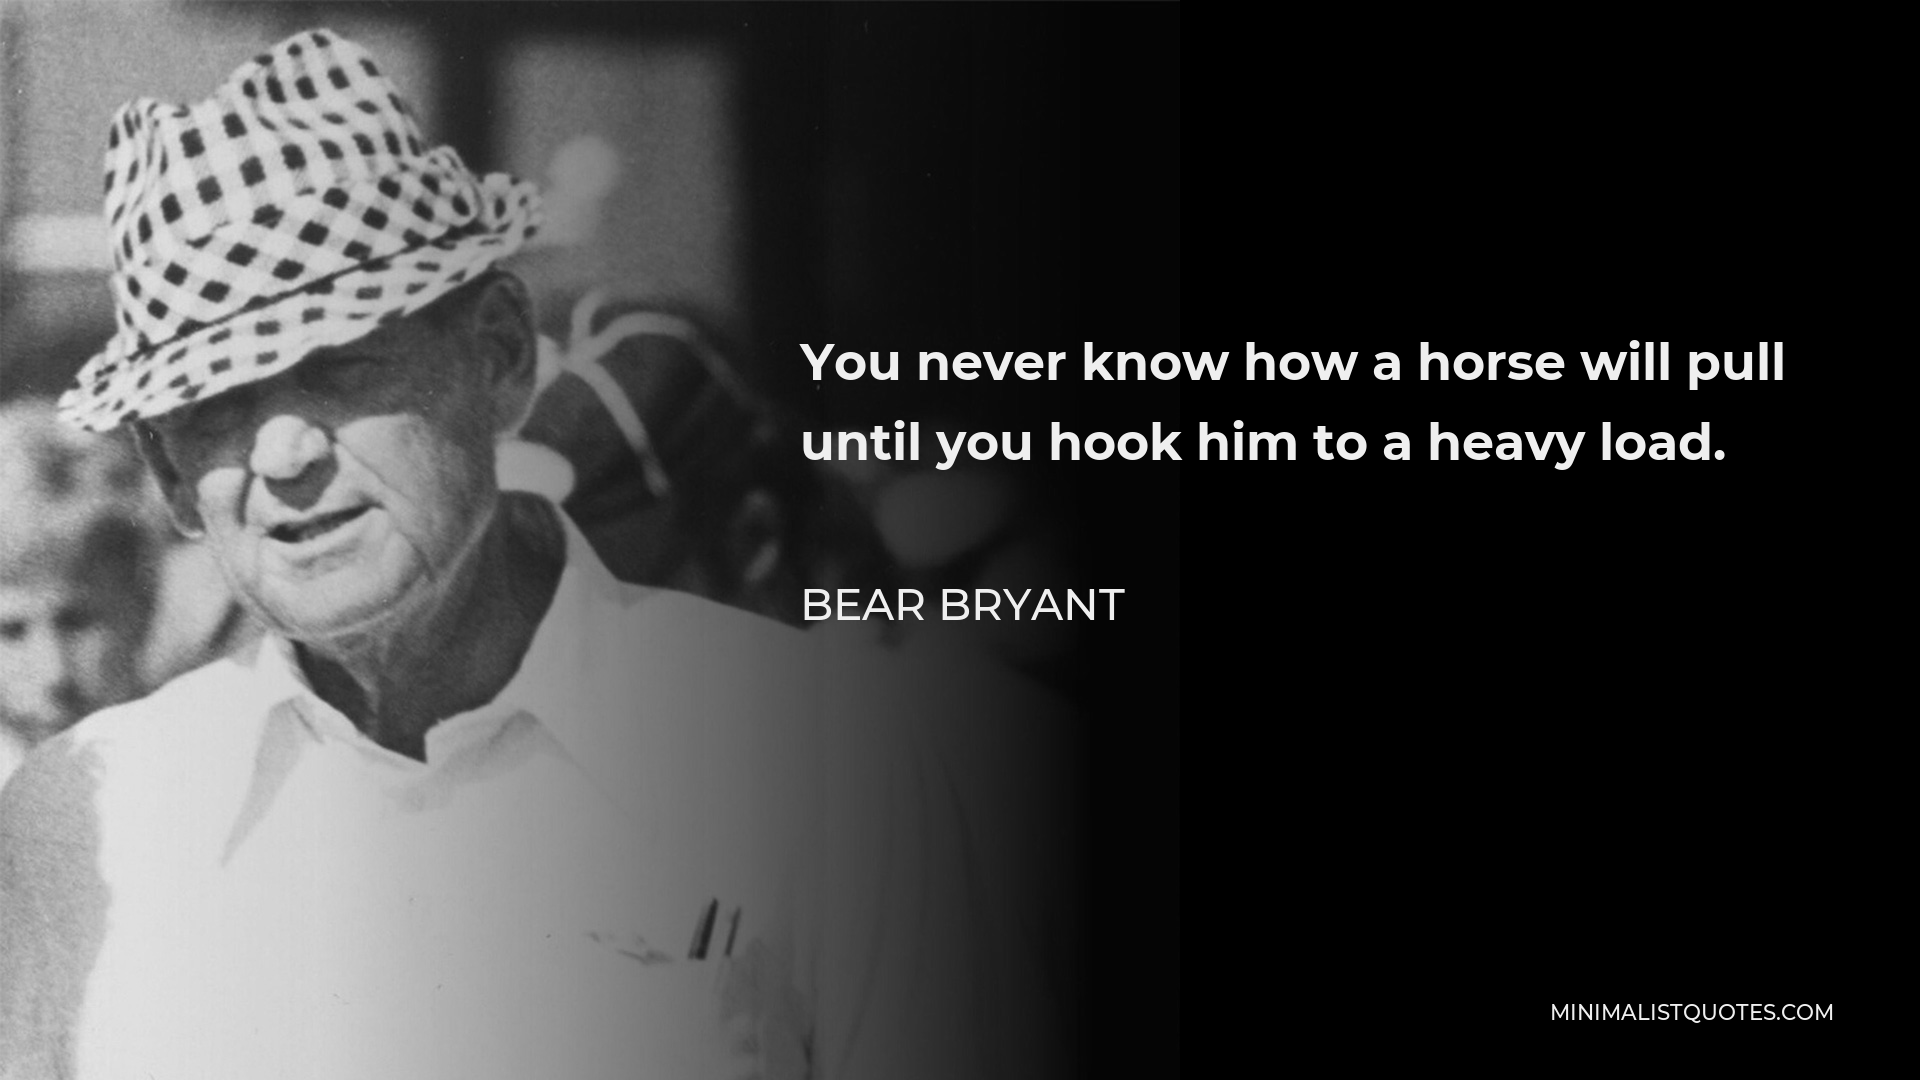 Bear Bryant Quote - You never know how a horse will pull until you hook him to a heavy load.